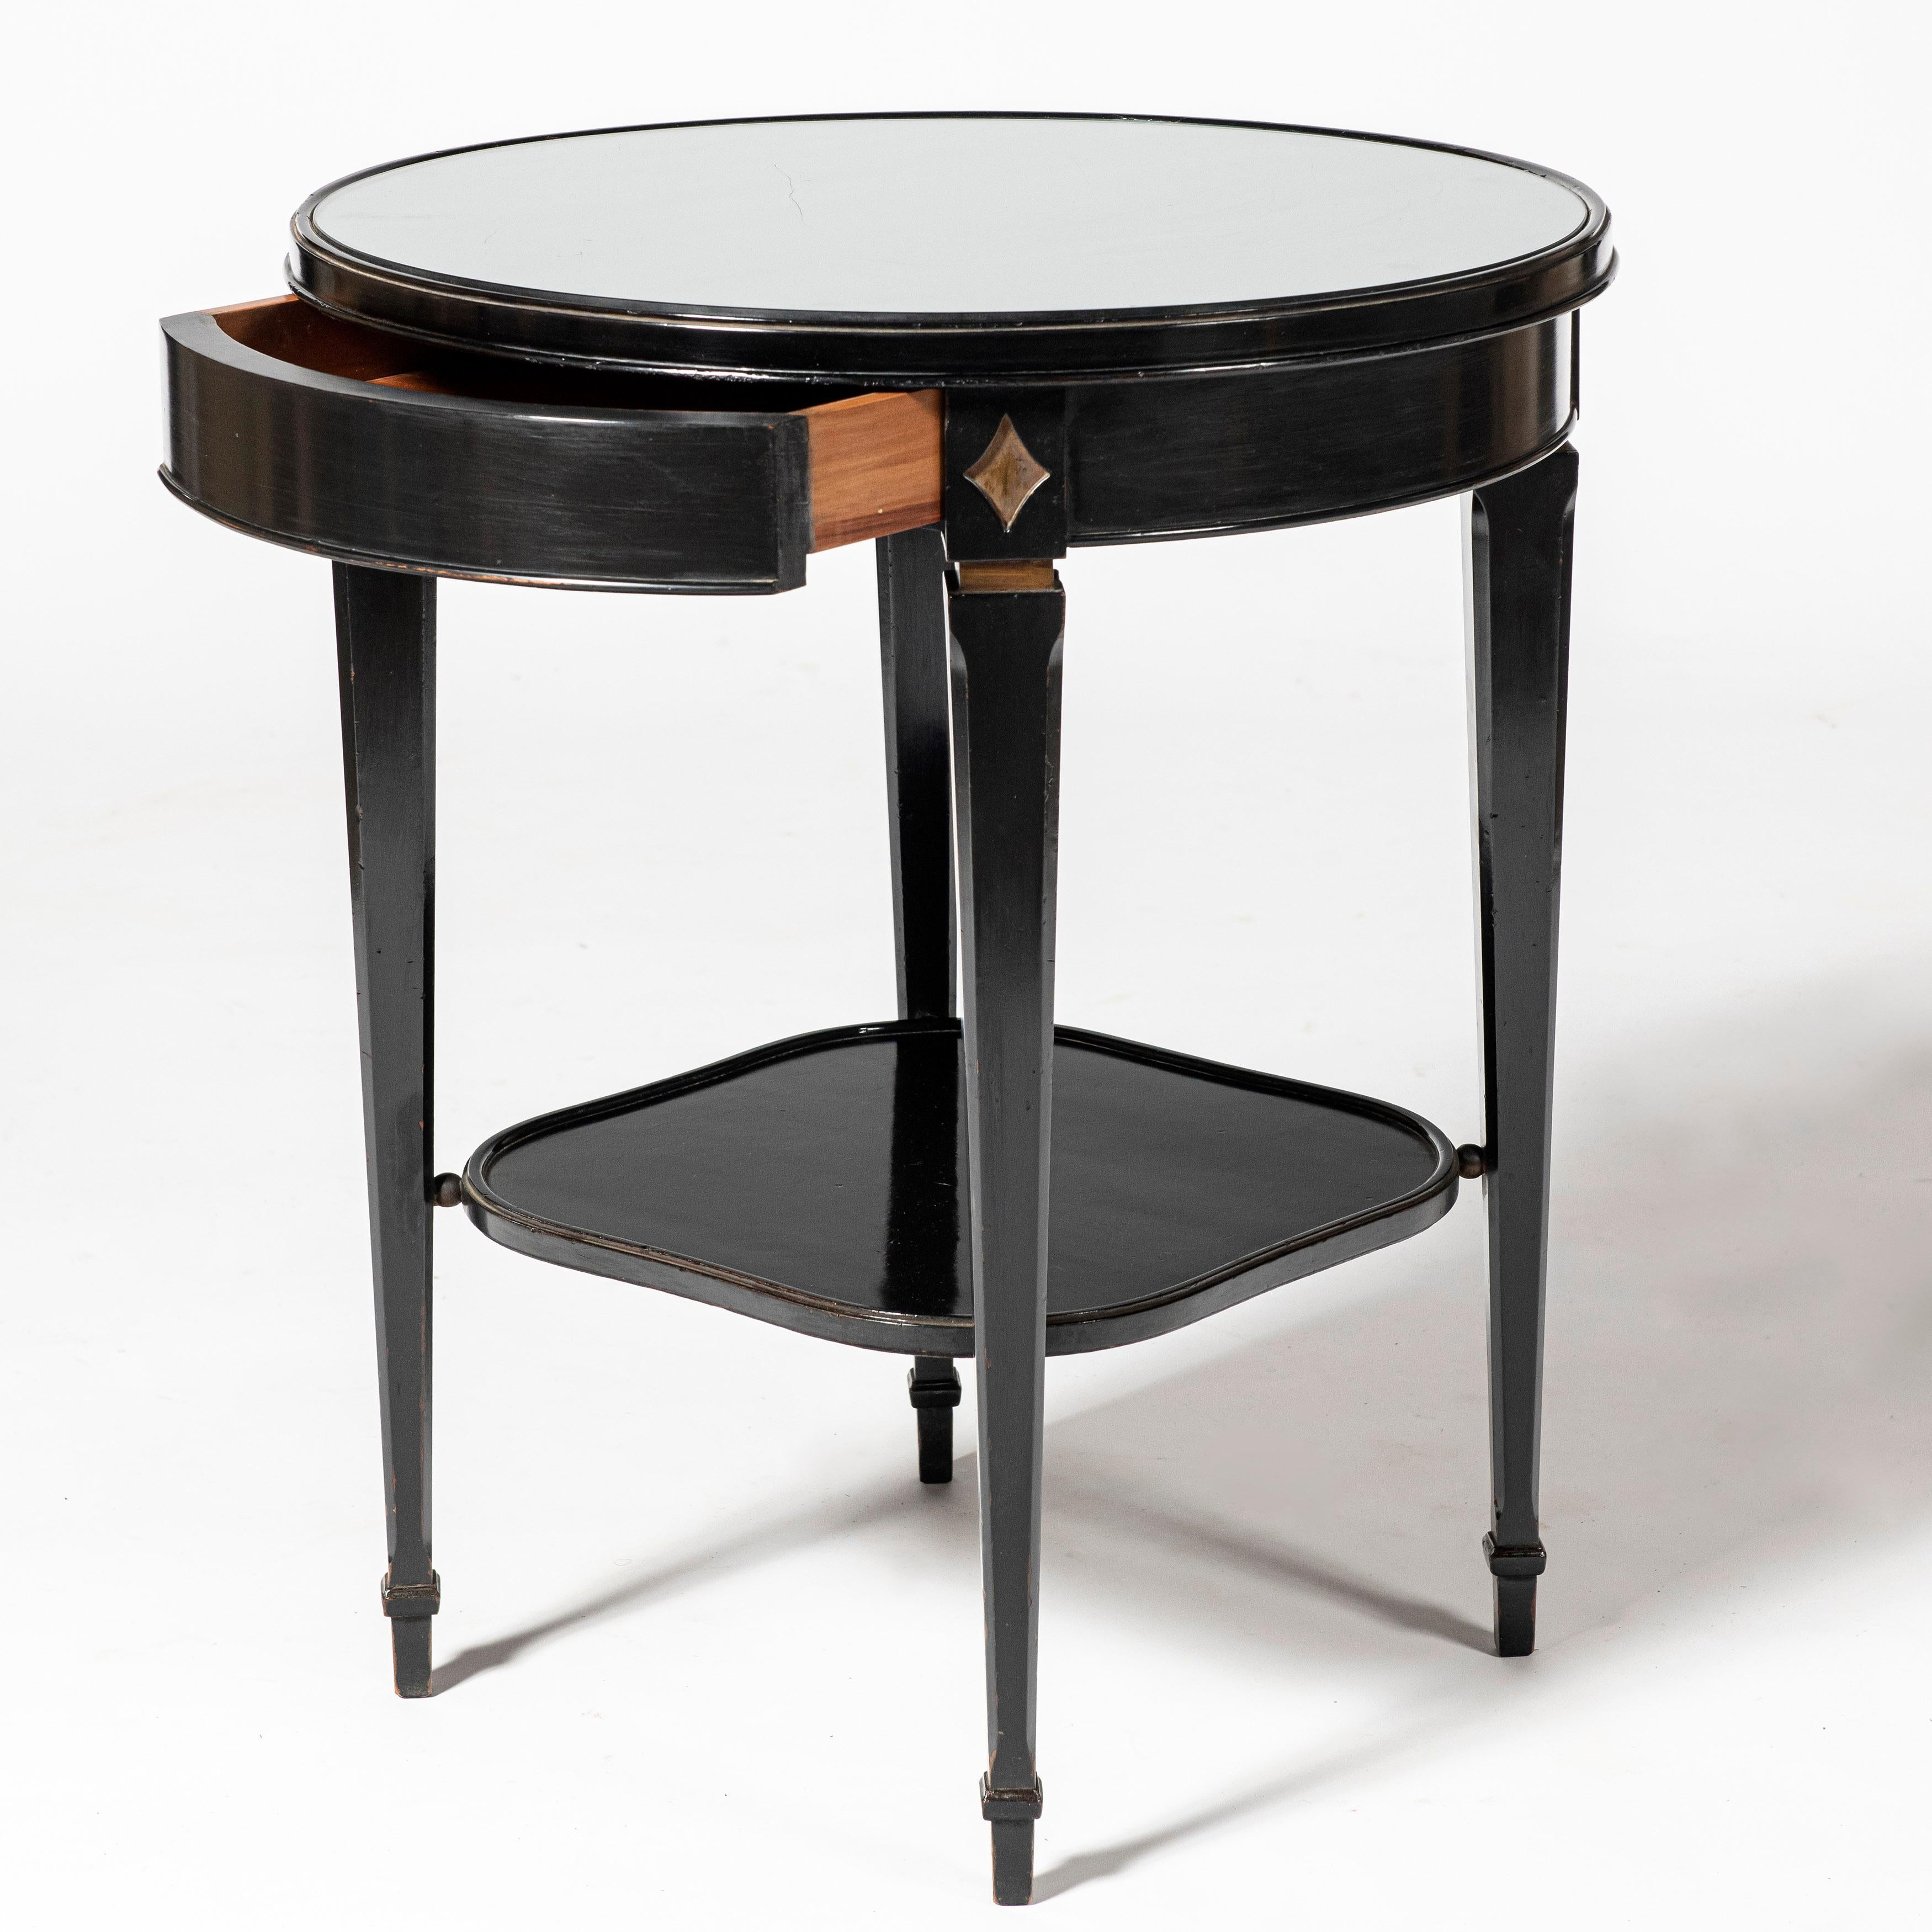 Wood and glass round table attributed to Maison Jansen, France, circa 1940.